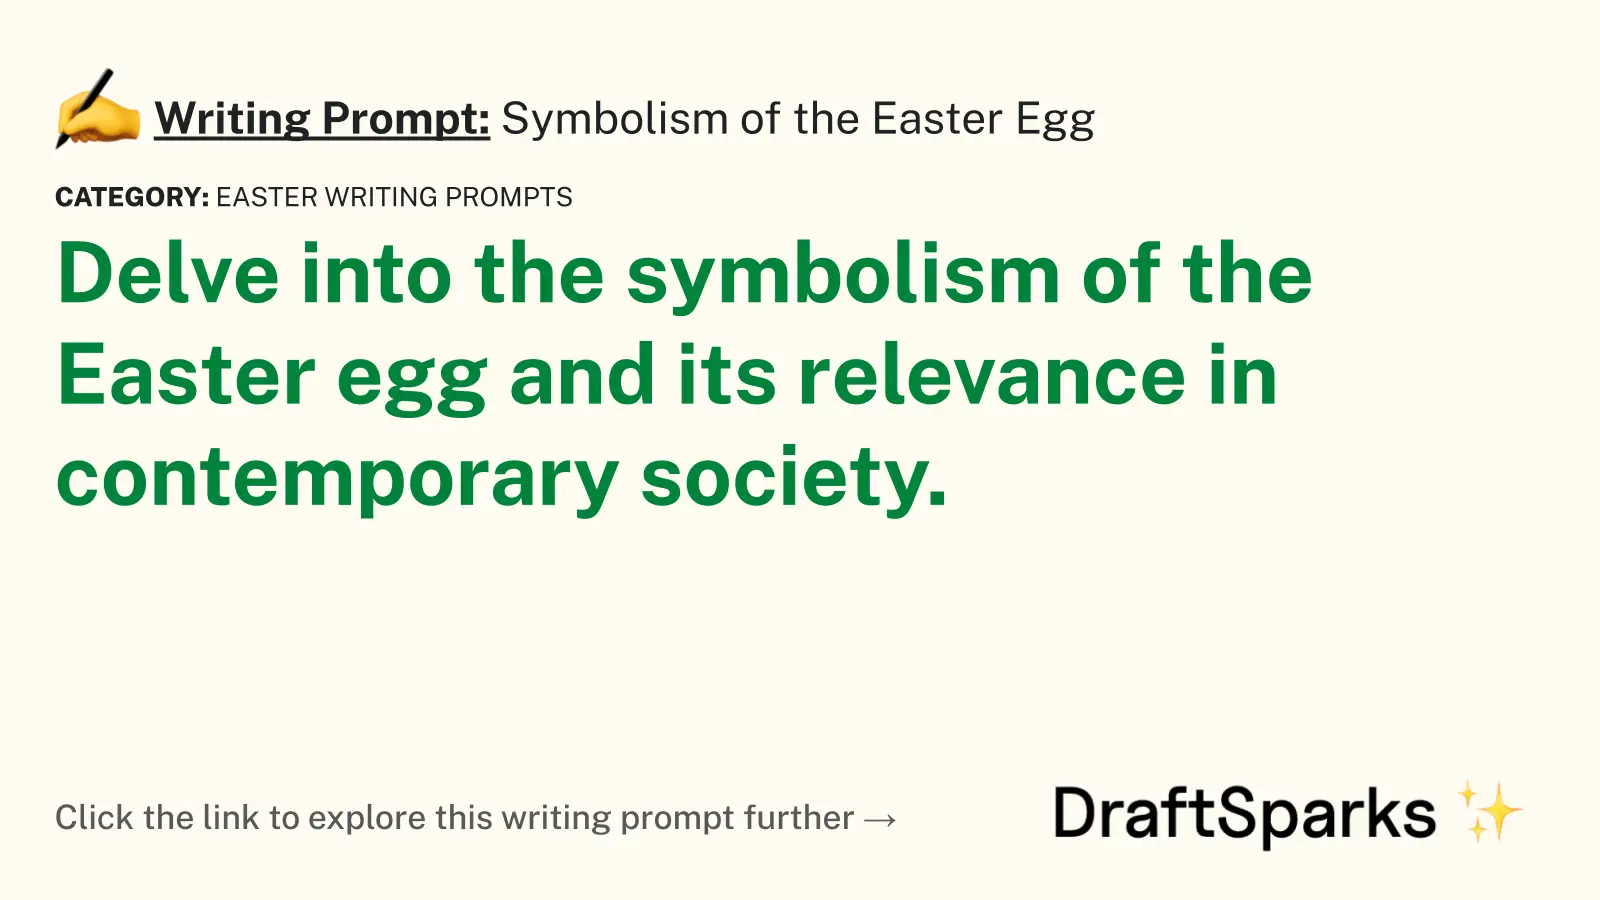 Symbolism of the Easter Egg